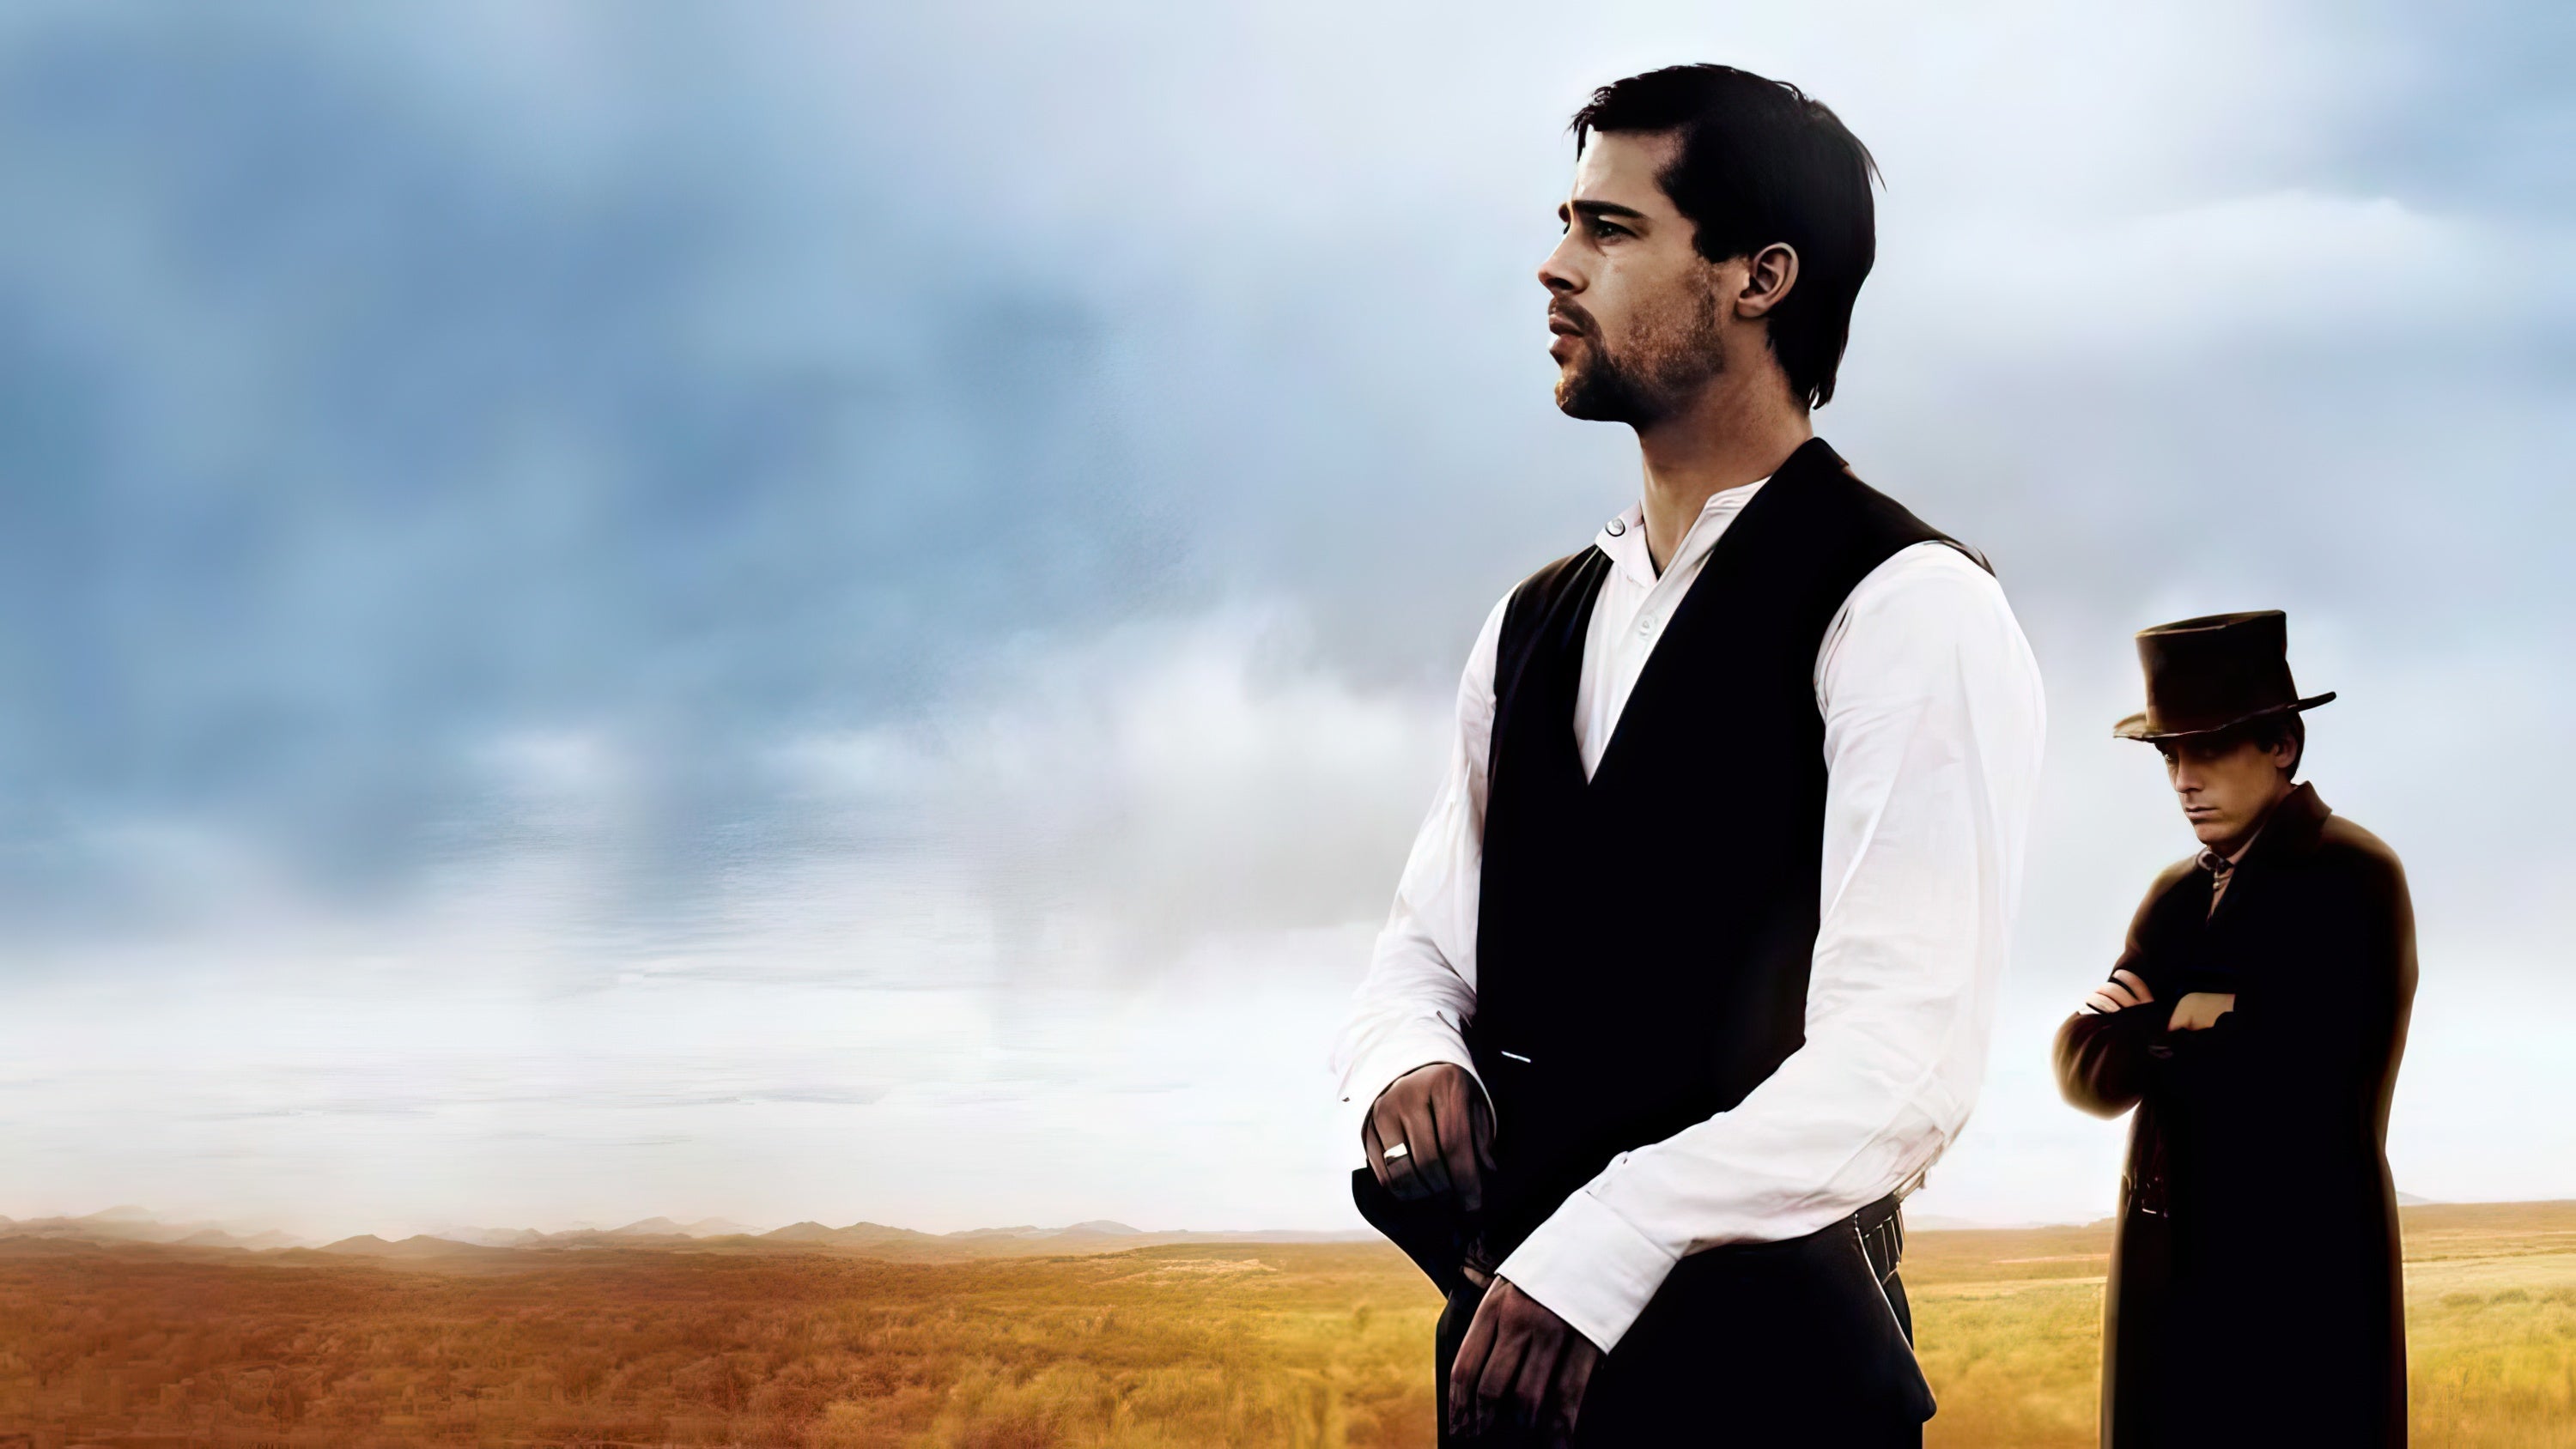 The Assassination of Jesse James by the Coward Robert Ford - Script - Image from the film